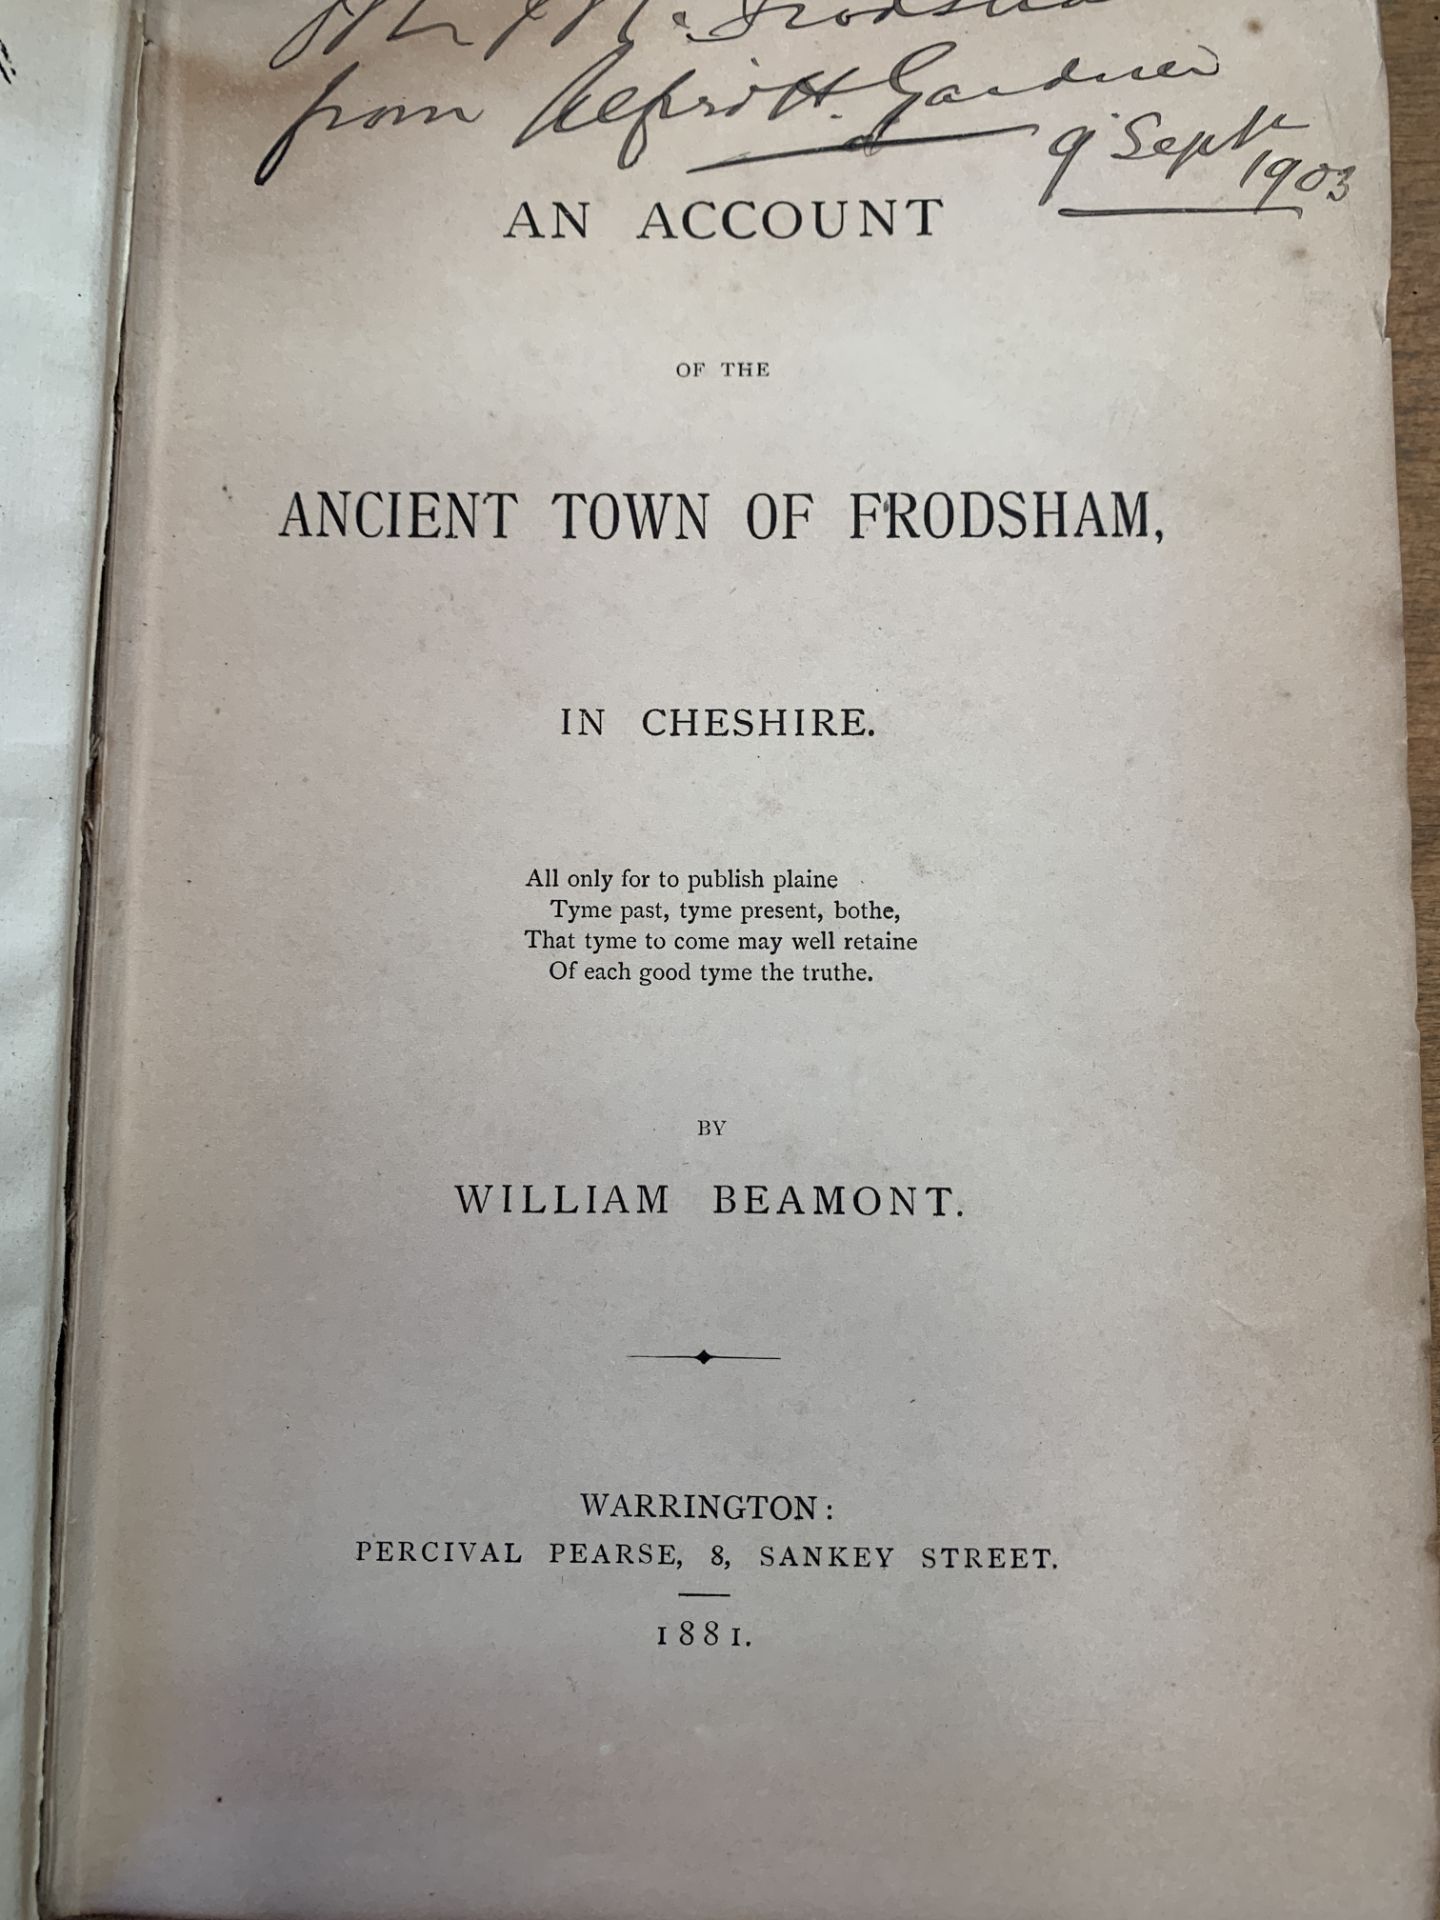 An Account of the Ancient Town of Frodsham in Cheshire', 1881